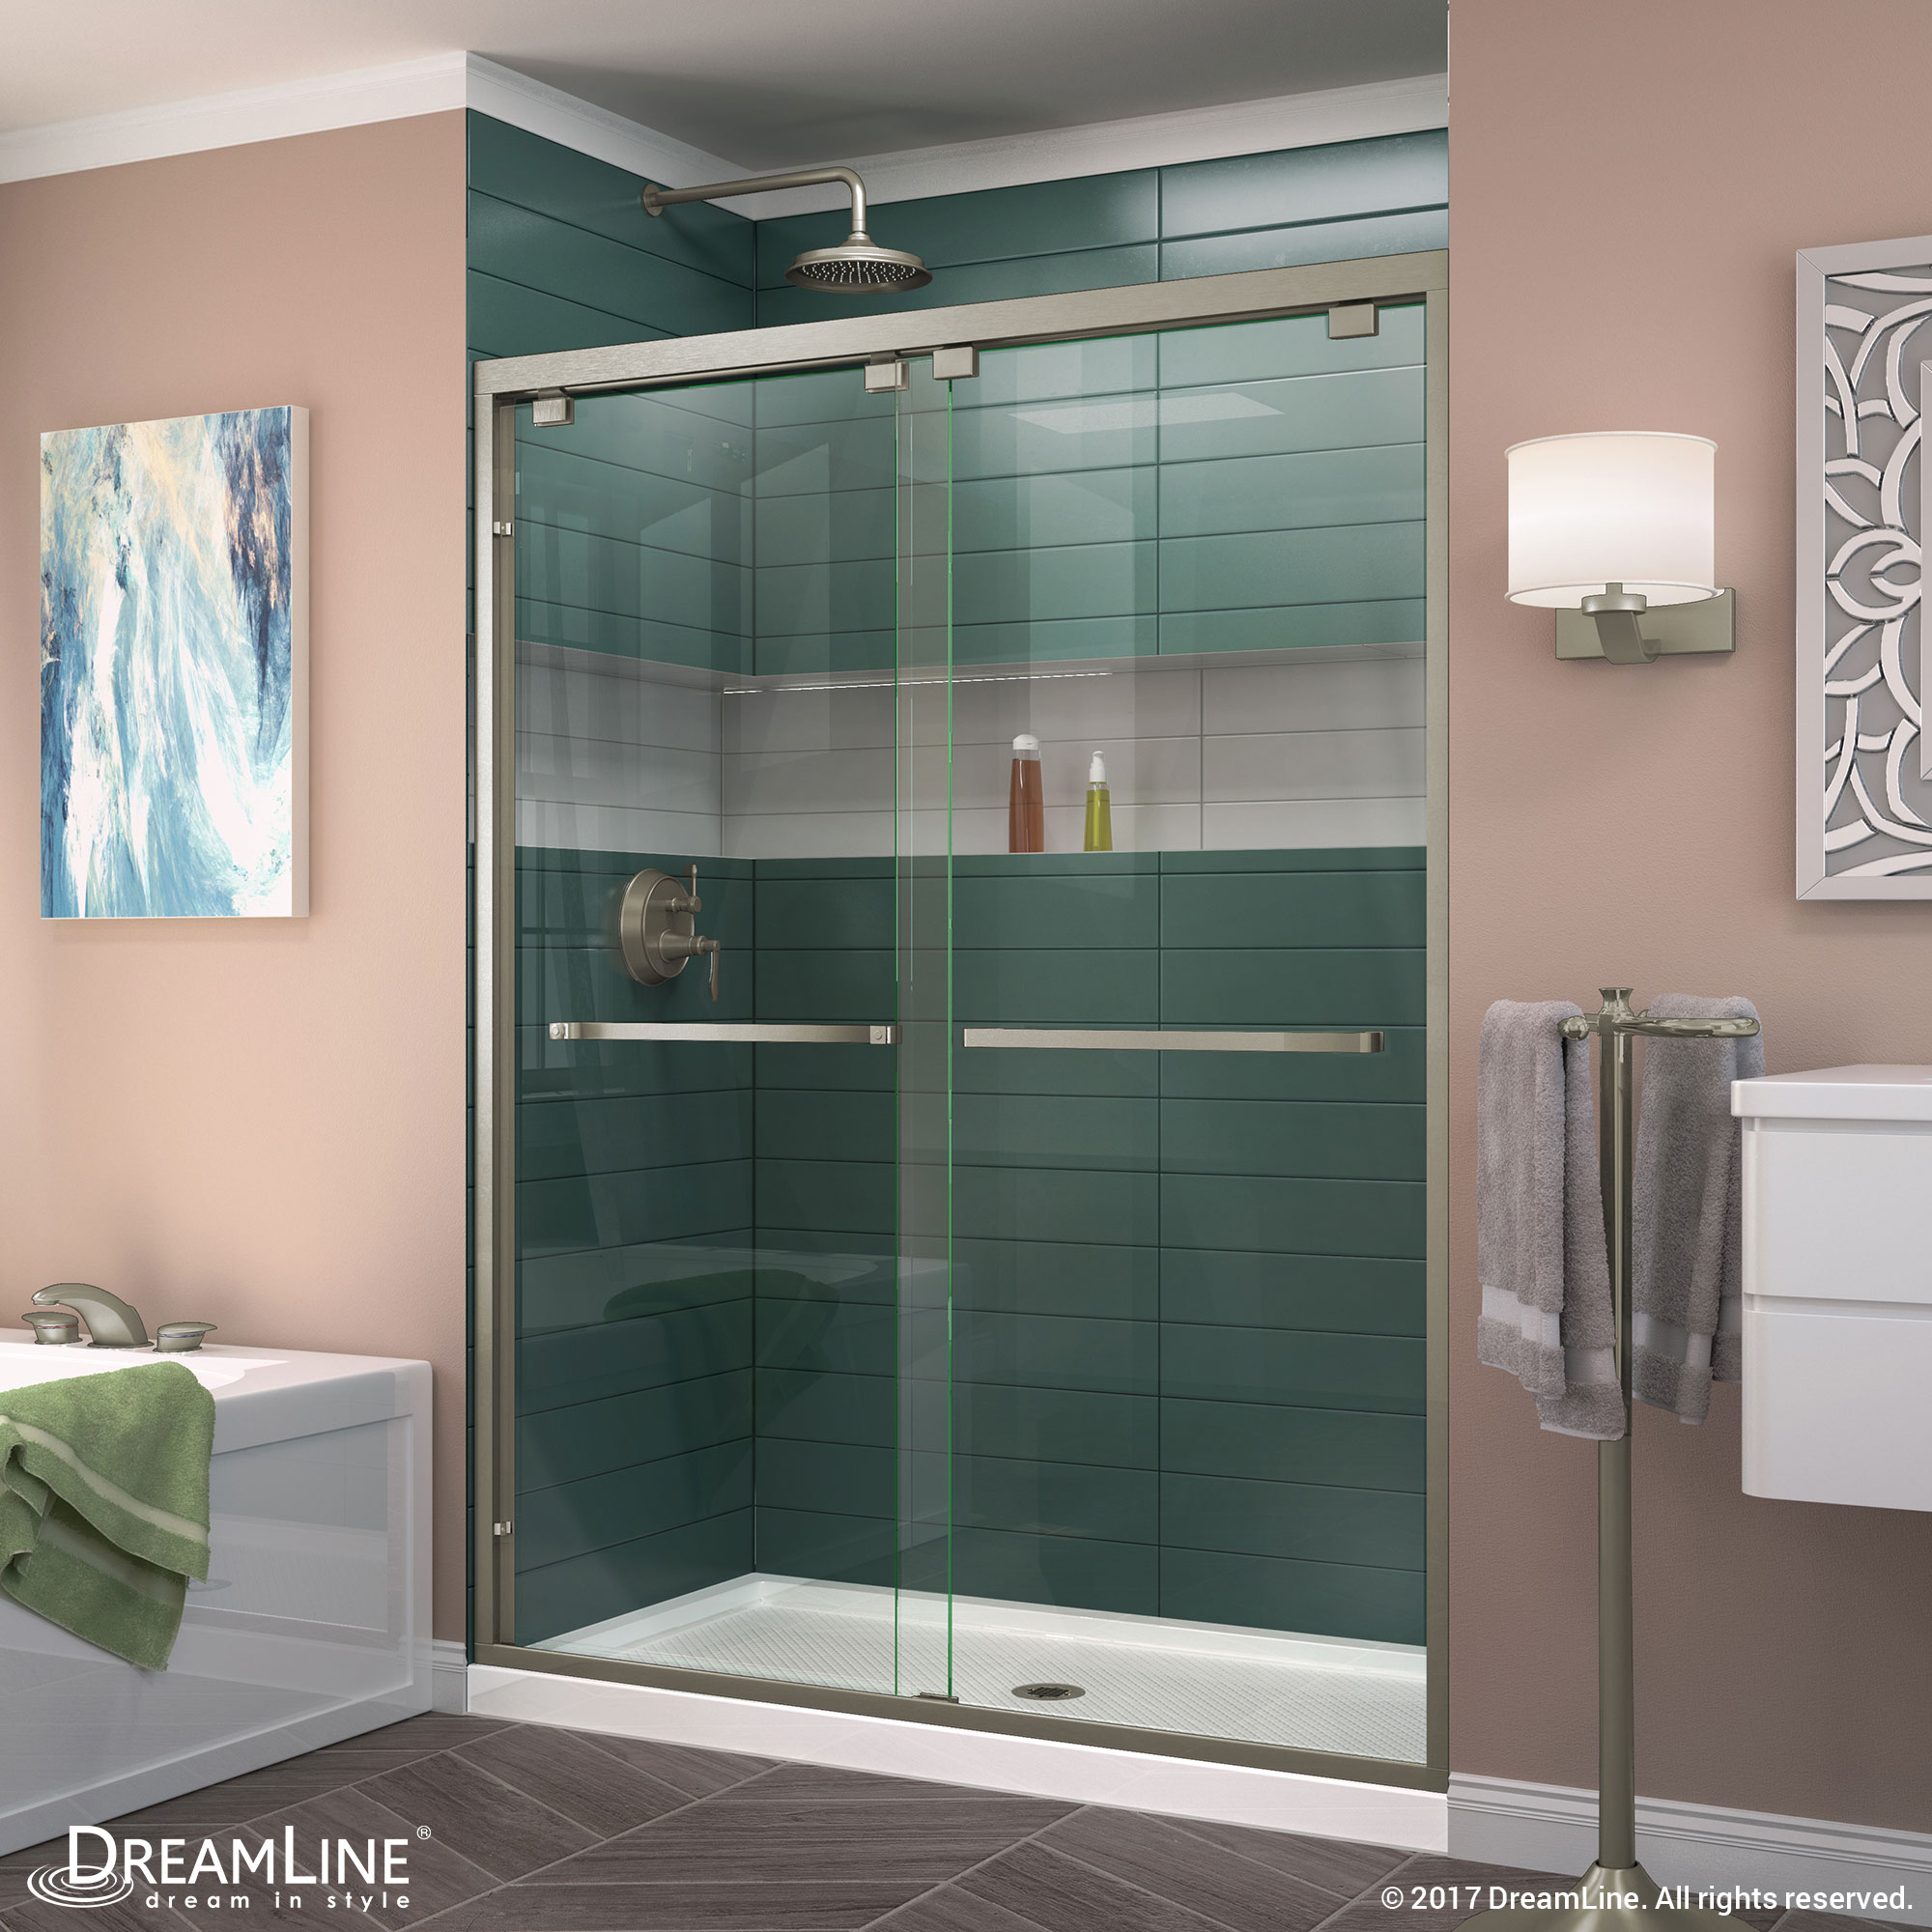 DreamLine Encore 32 in. D x 54 in. W x 78 3/4 in. H Bypass Shower Door in Chrome and Center Drain White Base Kit